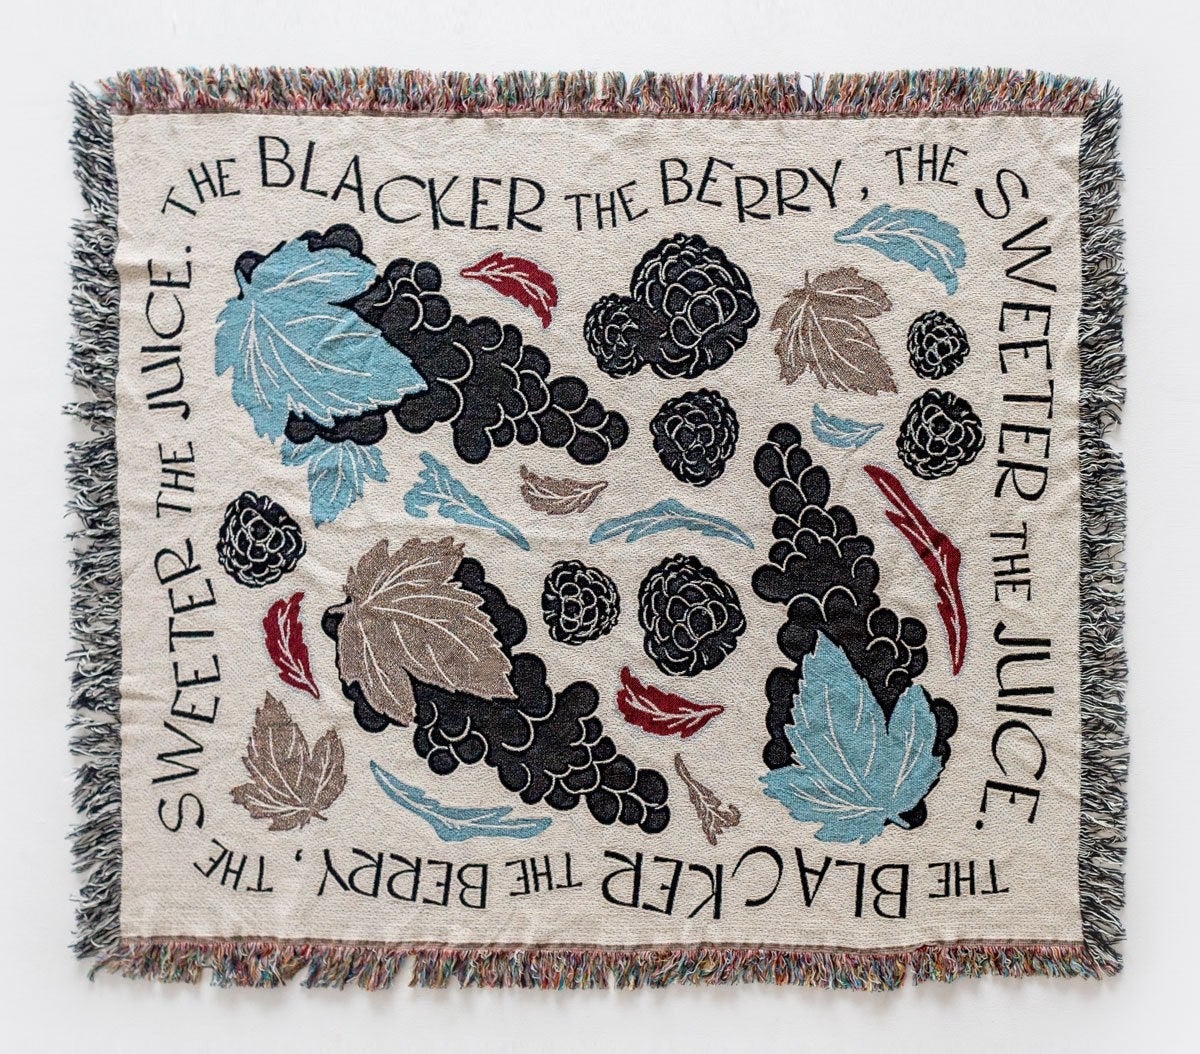 a blanket with blackberries and leaves on it with a boarder that says &quot;the blacker the berry the sweeter the juice&quot;